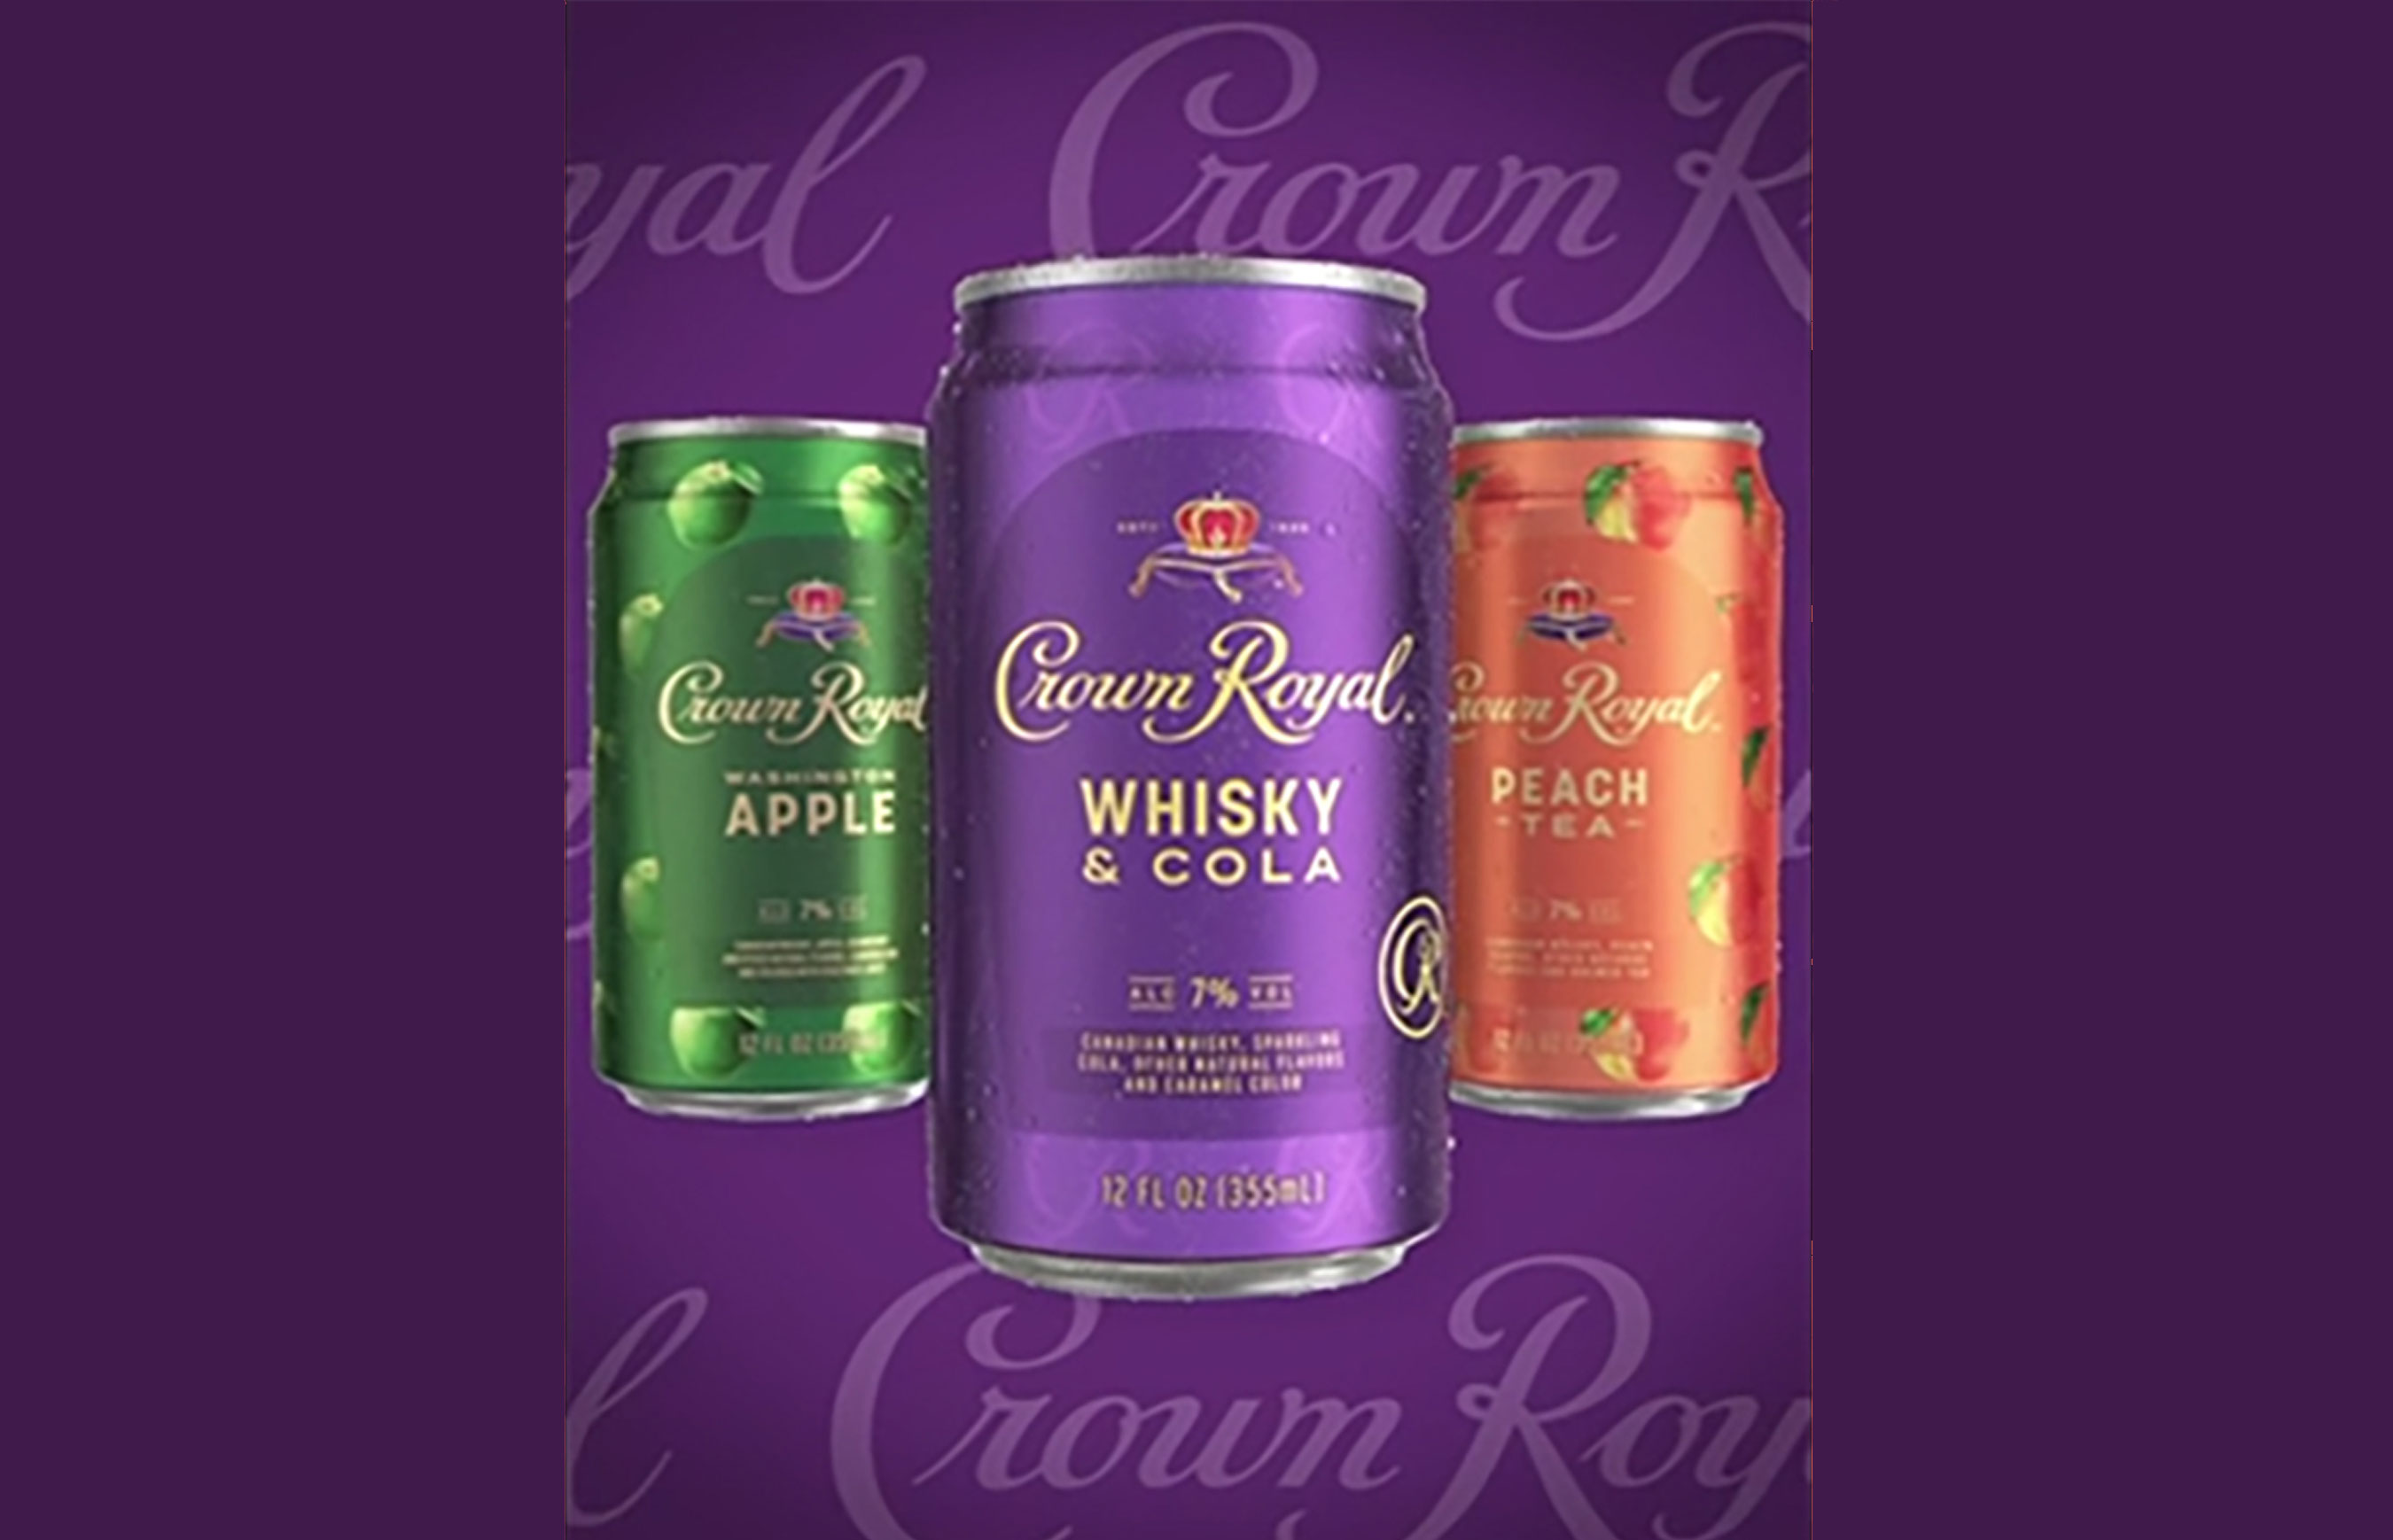 Play Video: Whisky & Cola featuring Crown Royal whisky and cola